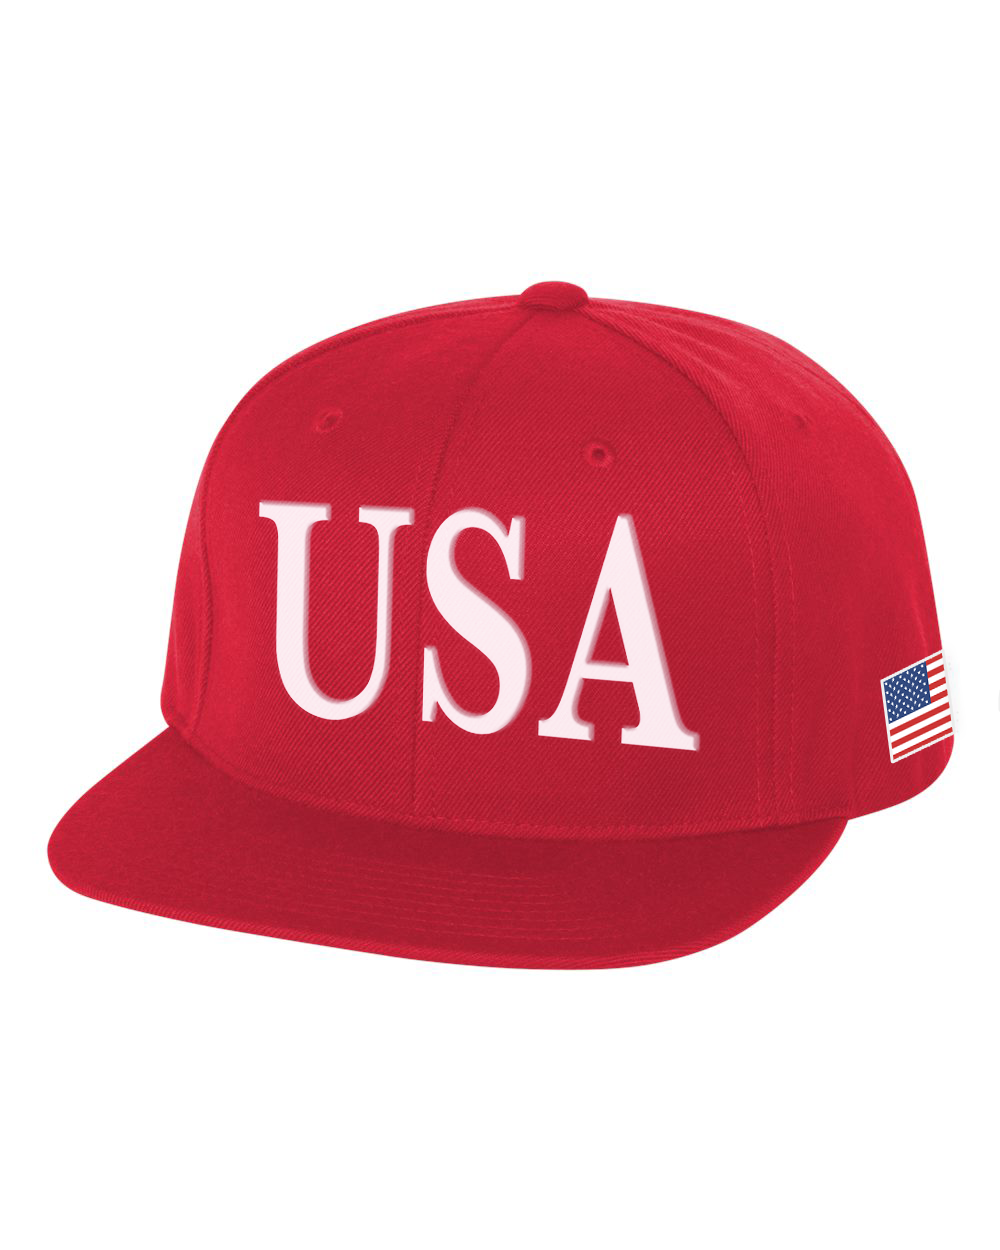 USA Hat - Red